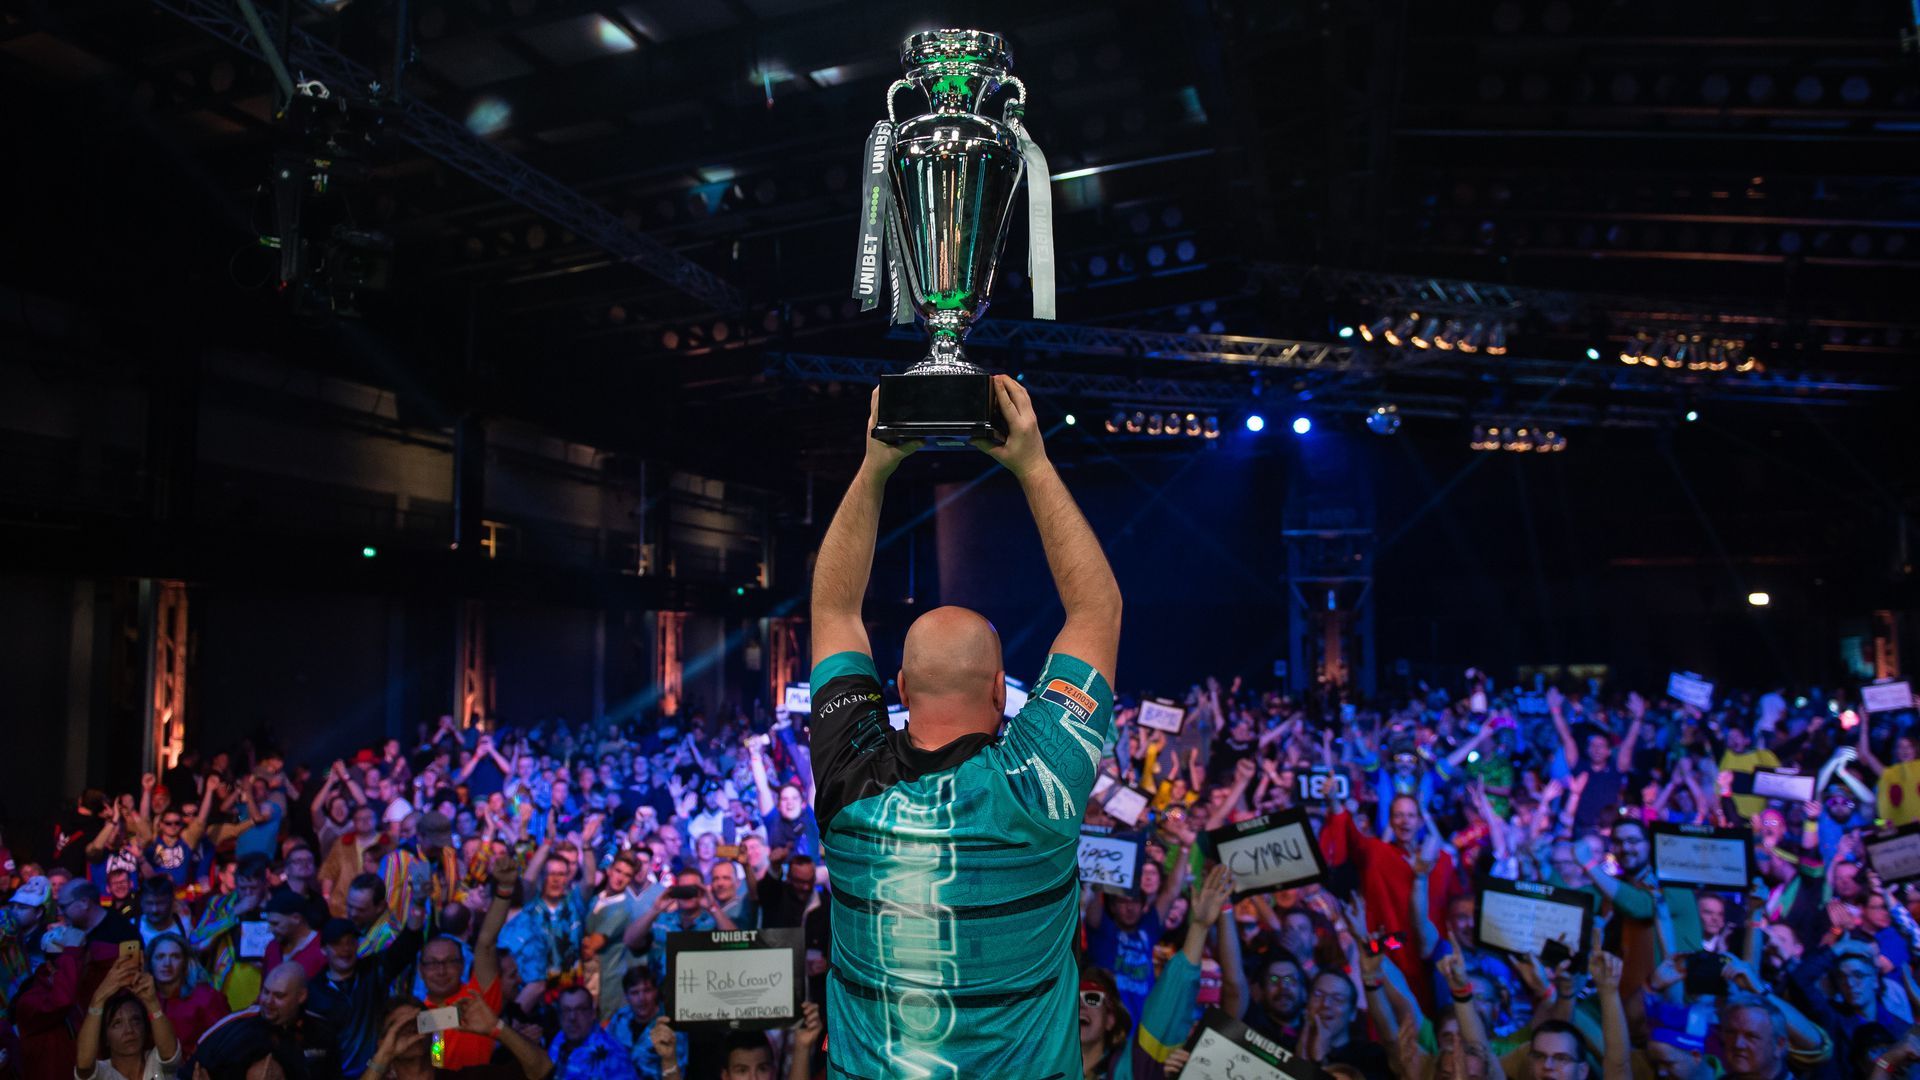 Rob Cross holding a trophy.